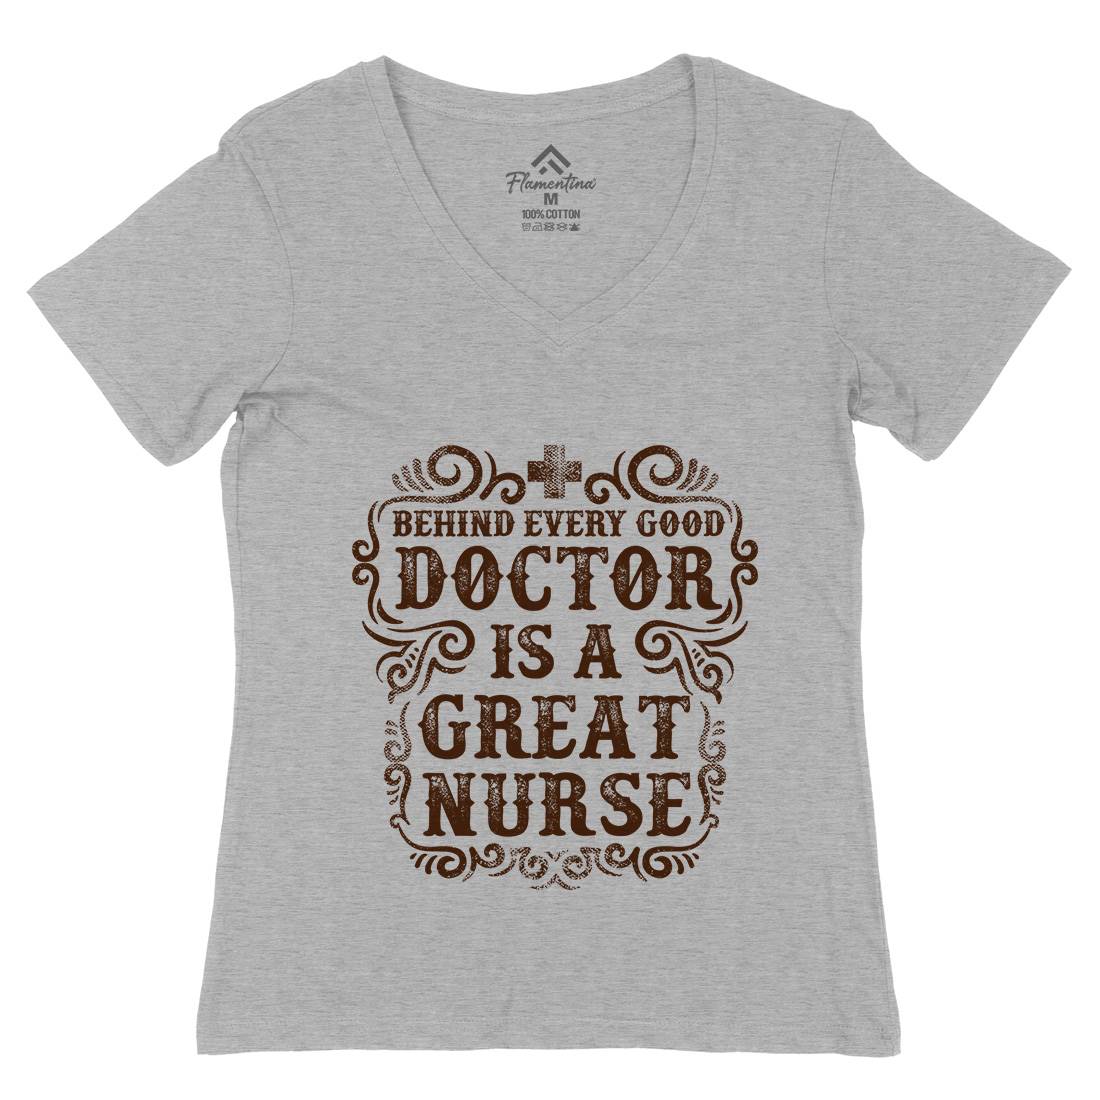 Behind Every Good Doctor Is A Great Nurse Womens Organic V-Neck T-Shirt Work C910